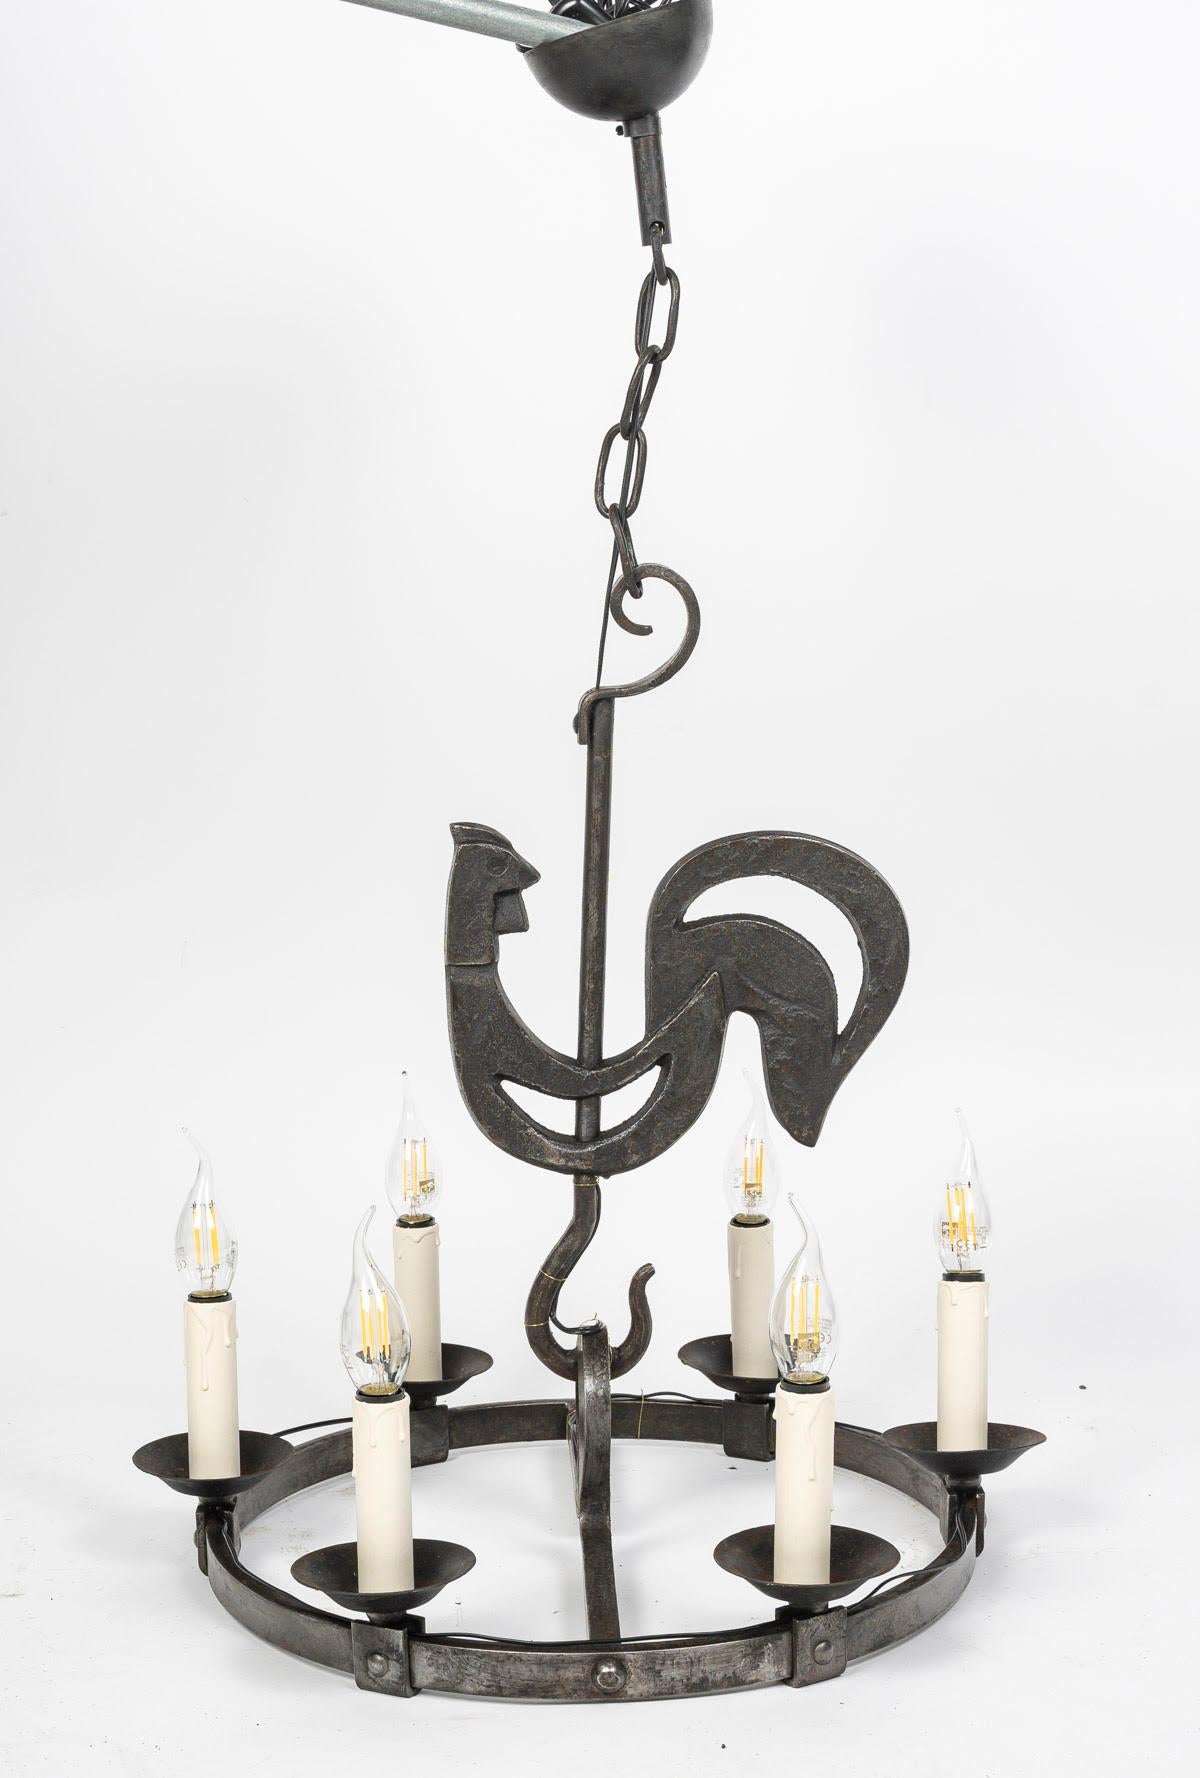 Pair of 1950s-1960s Wrought Iron Chandeliers by Jean Touret, Marolles Workshop. For Sale 1